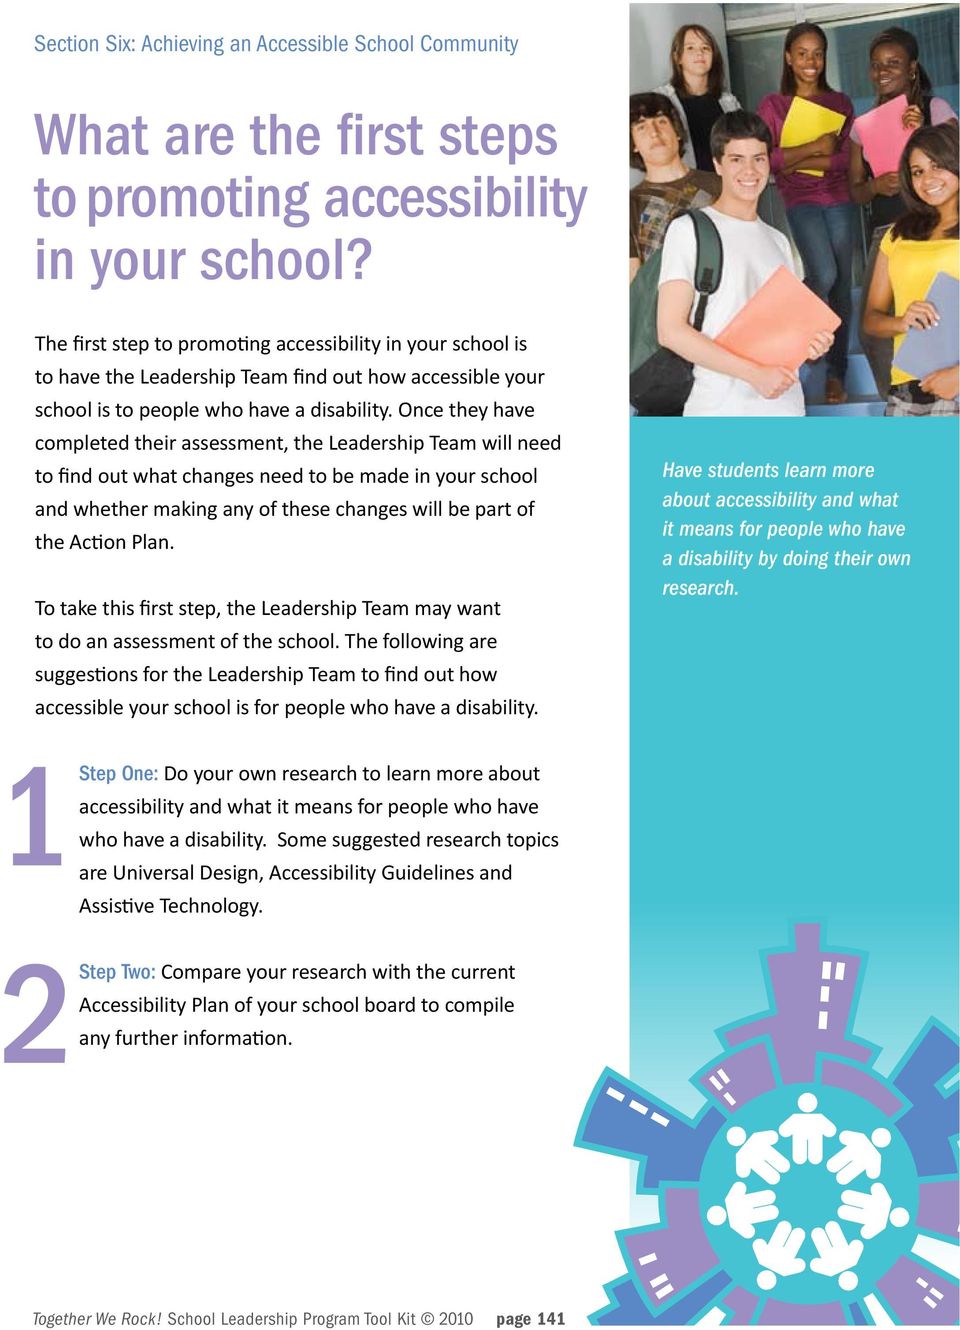 Once they have completed their assessment, the Leadership Team will need to find out what changes need to be made in your school and whether making any of these changes will be part of the Action